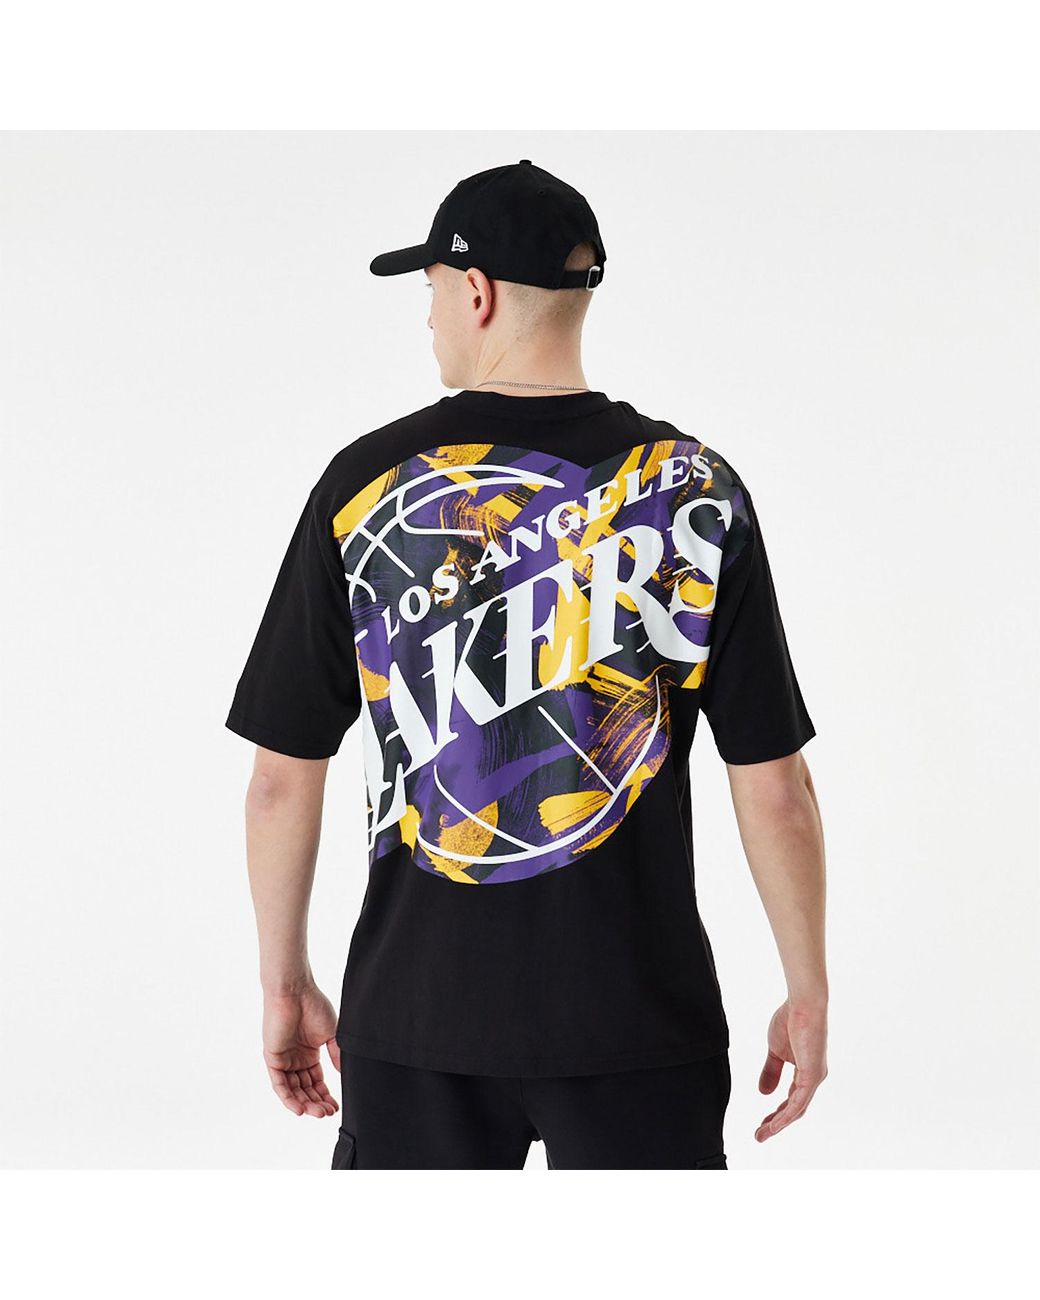 Los Anageles Lakers NBA Infill Logo White Oversized T-Shirt